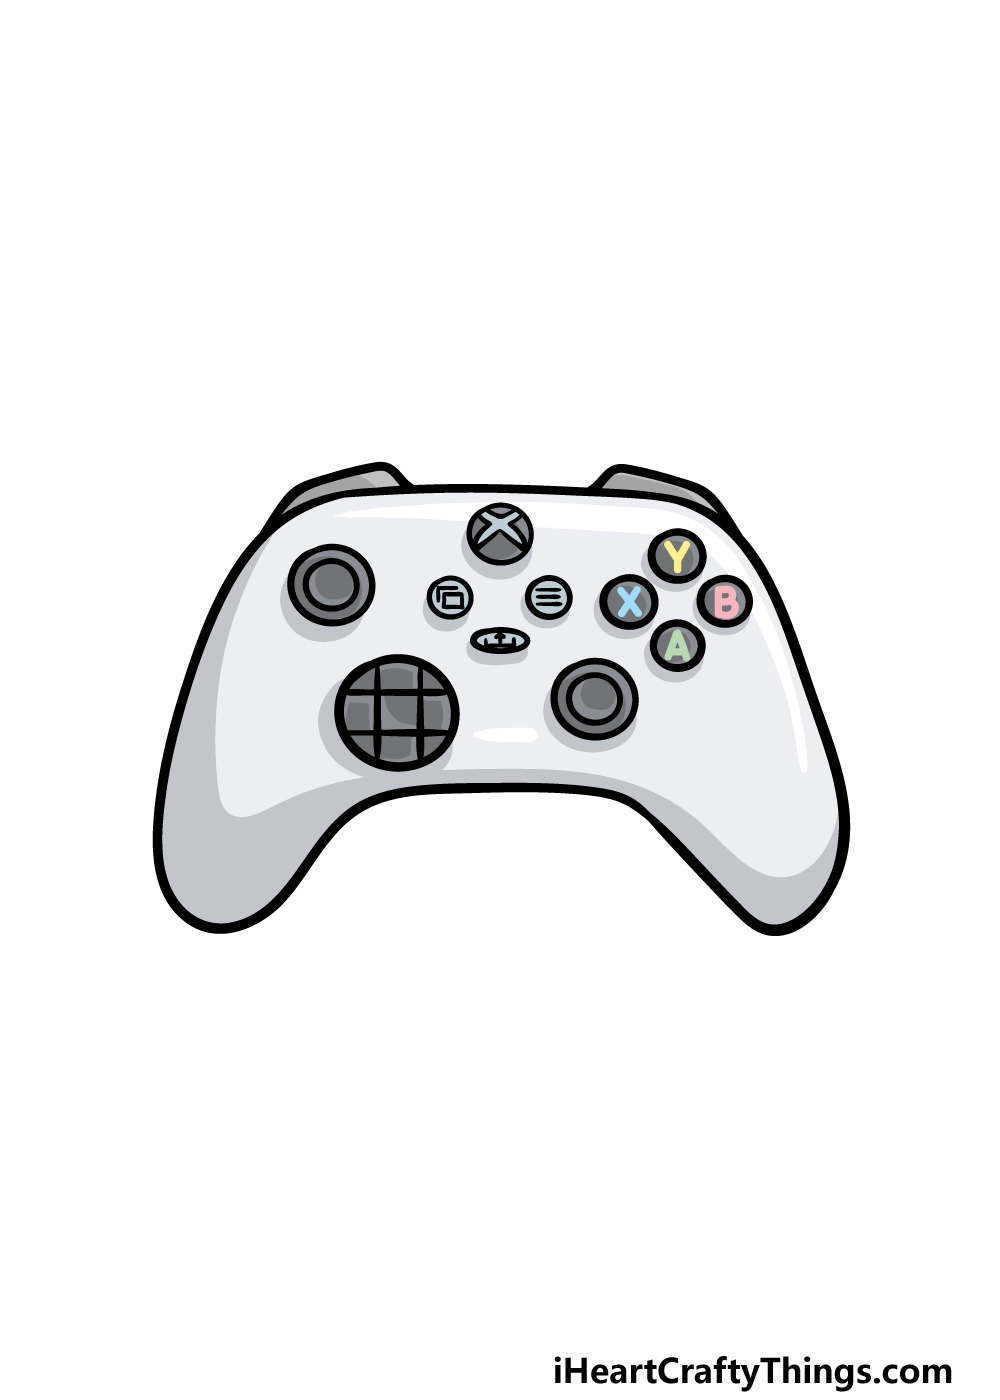 How To Draw An Xbox Controller – A Step by Step Guide